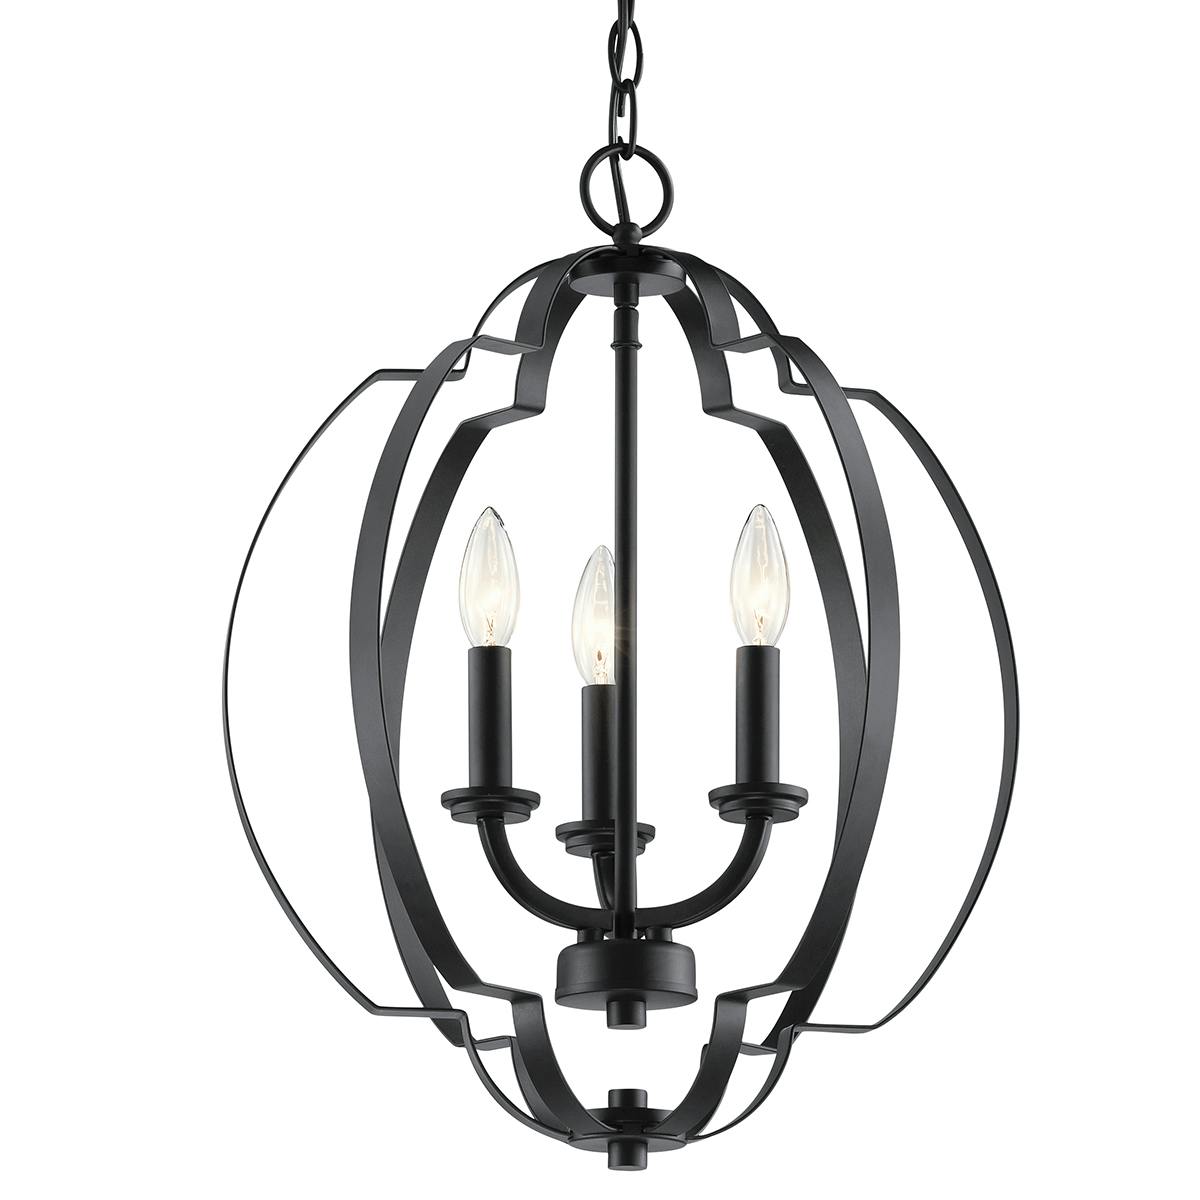 Close up view of the Voleta 20.75" 3 Light Pendant Black on a white background